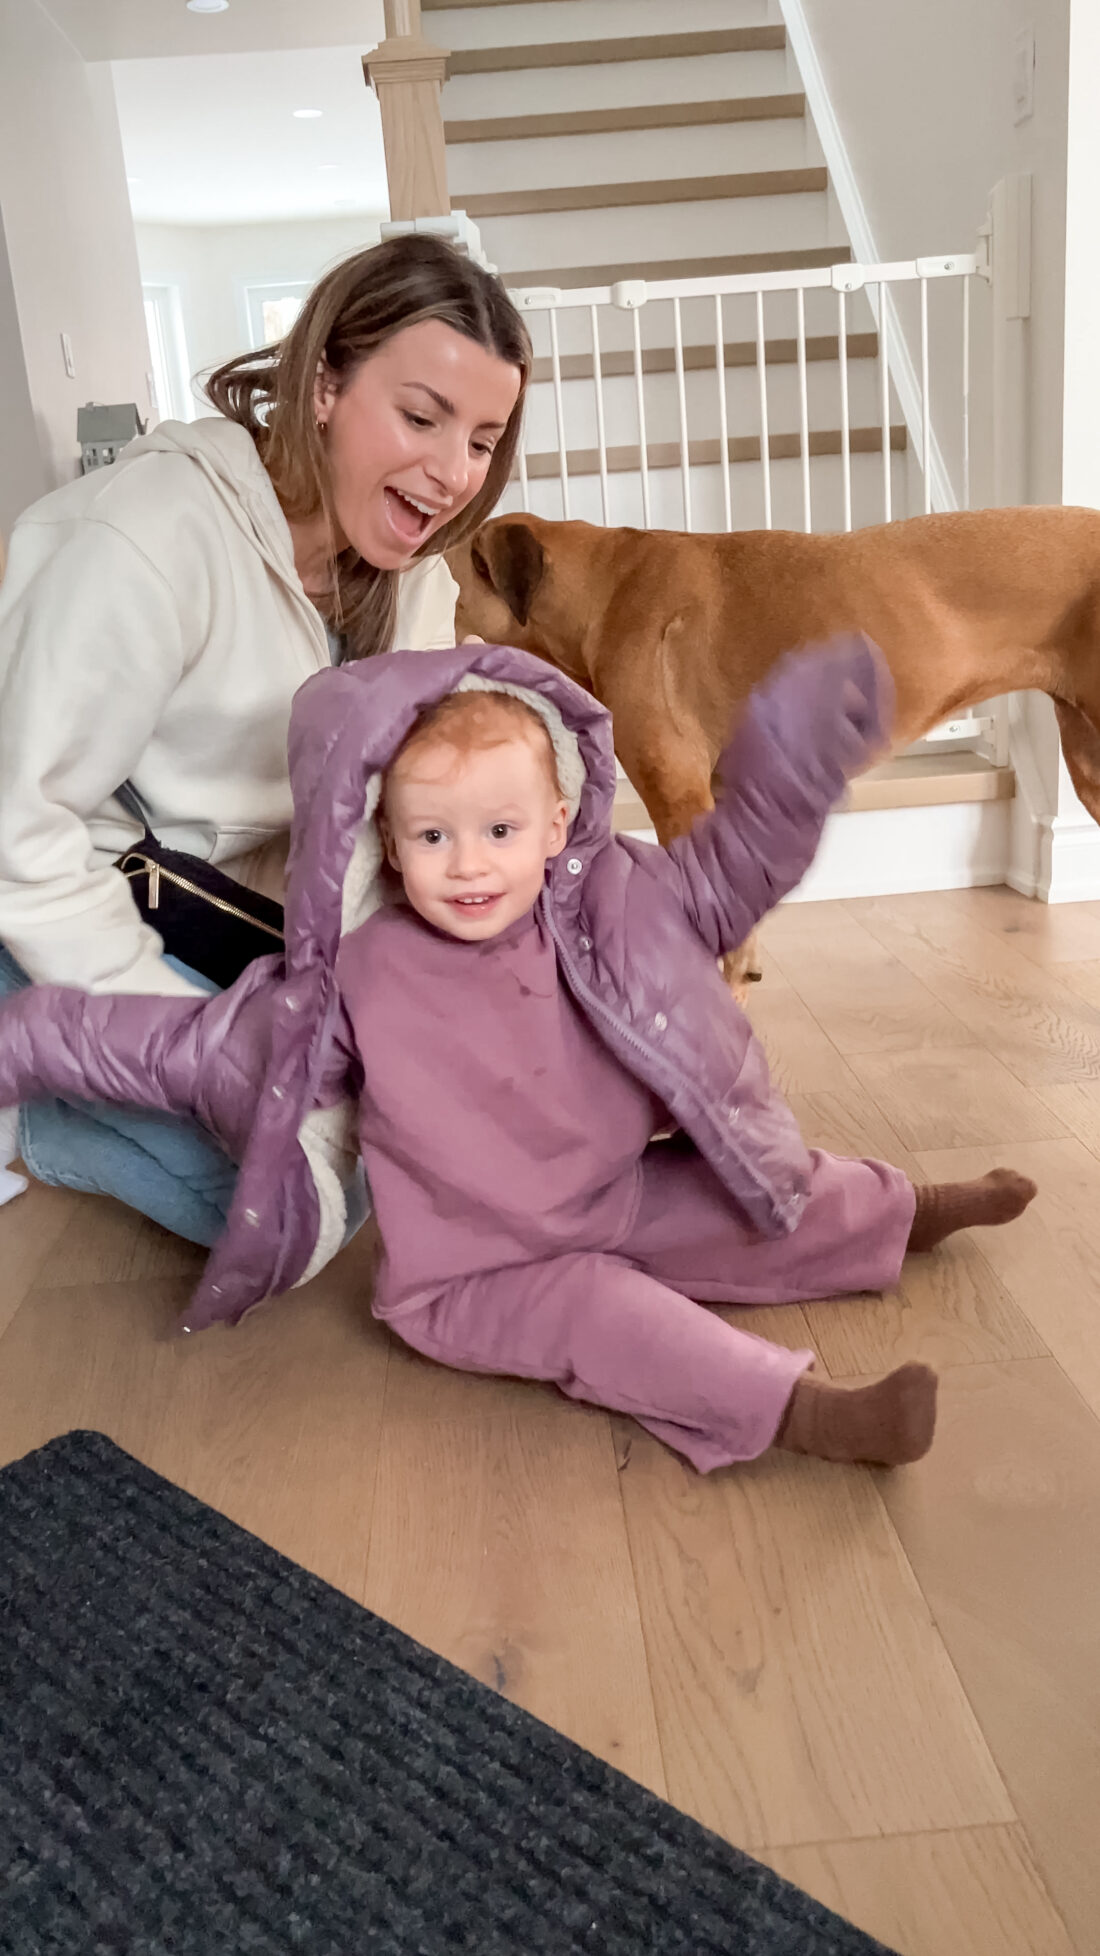 A woman helping a toddler put on her purple jacket